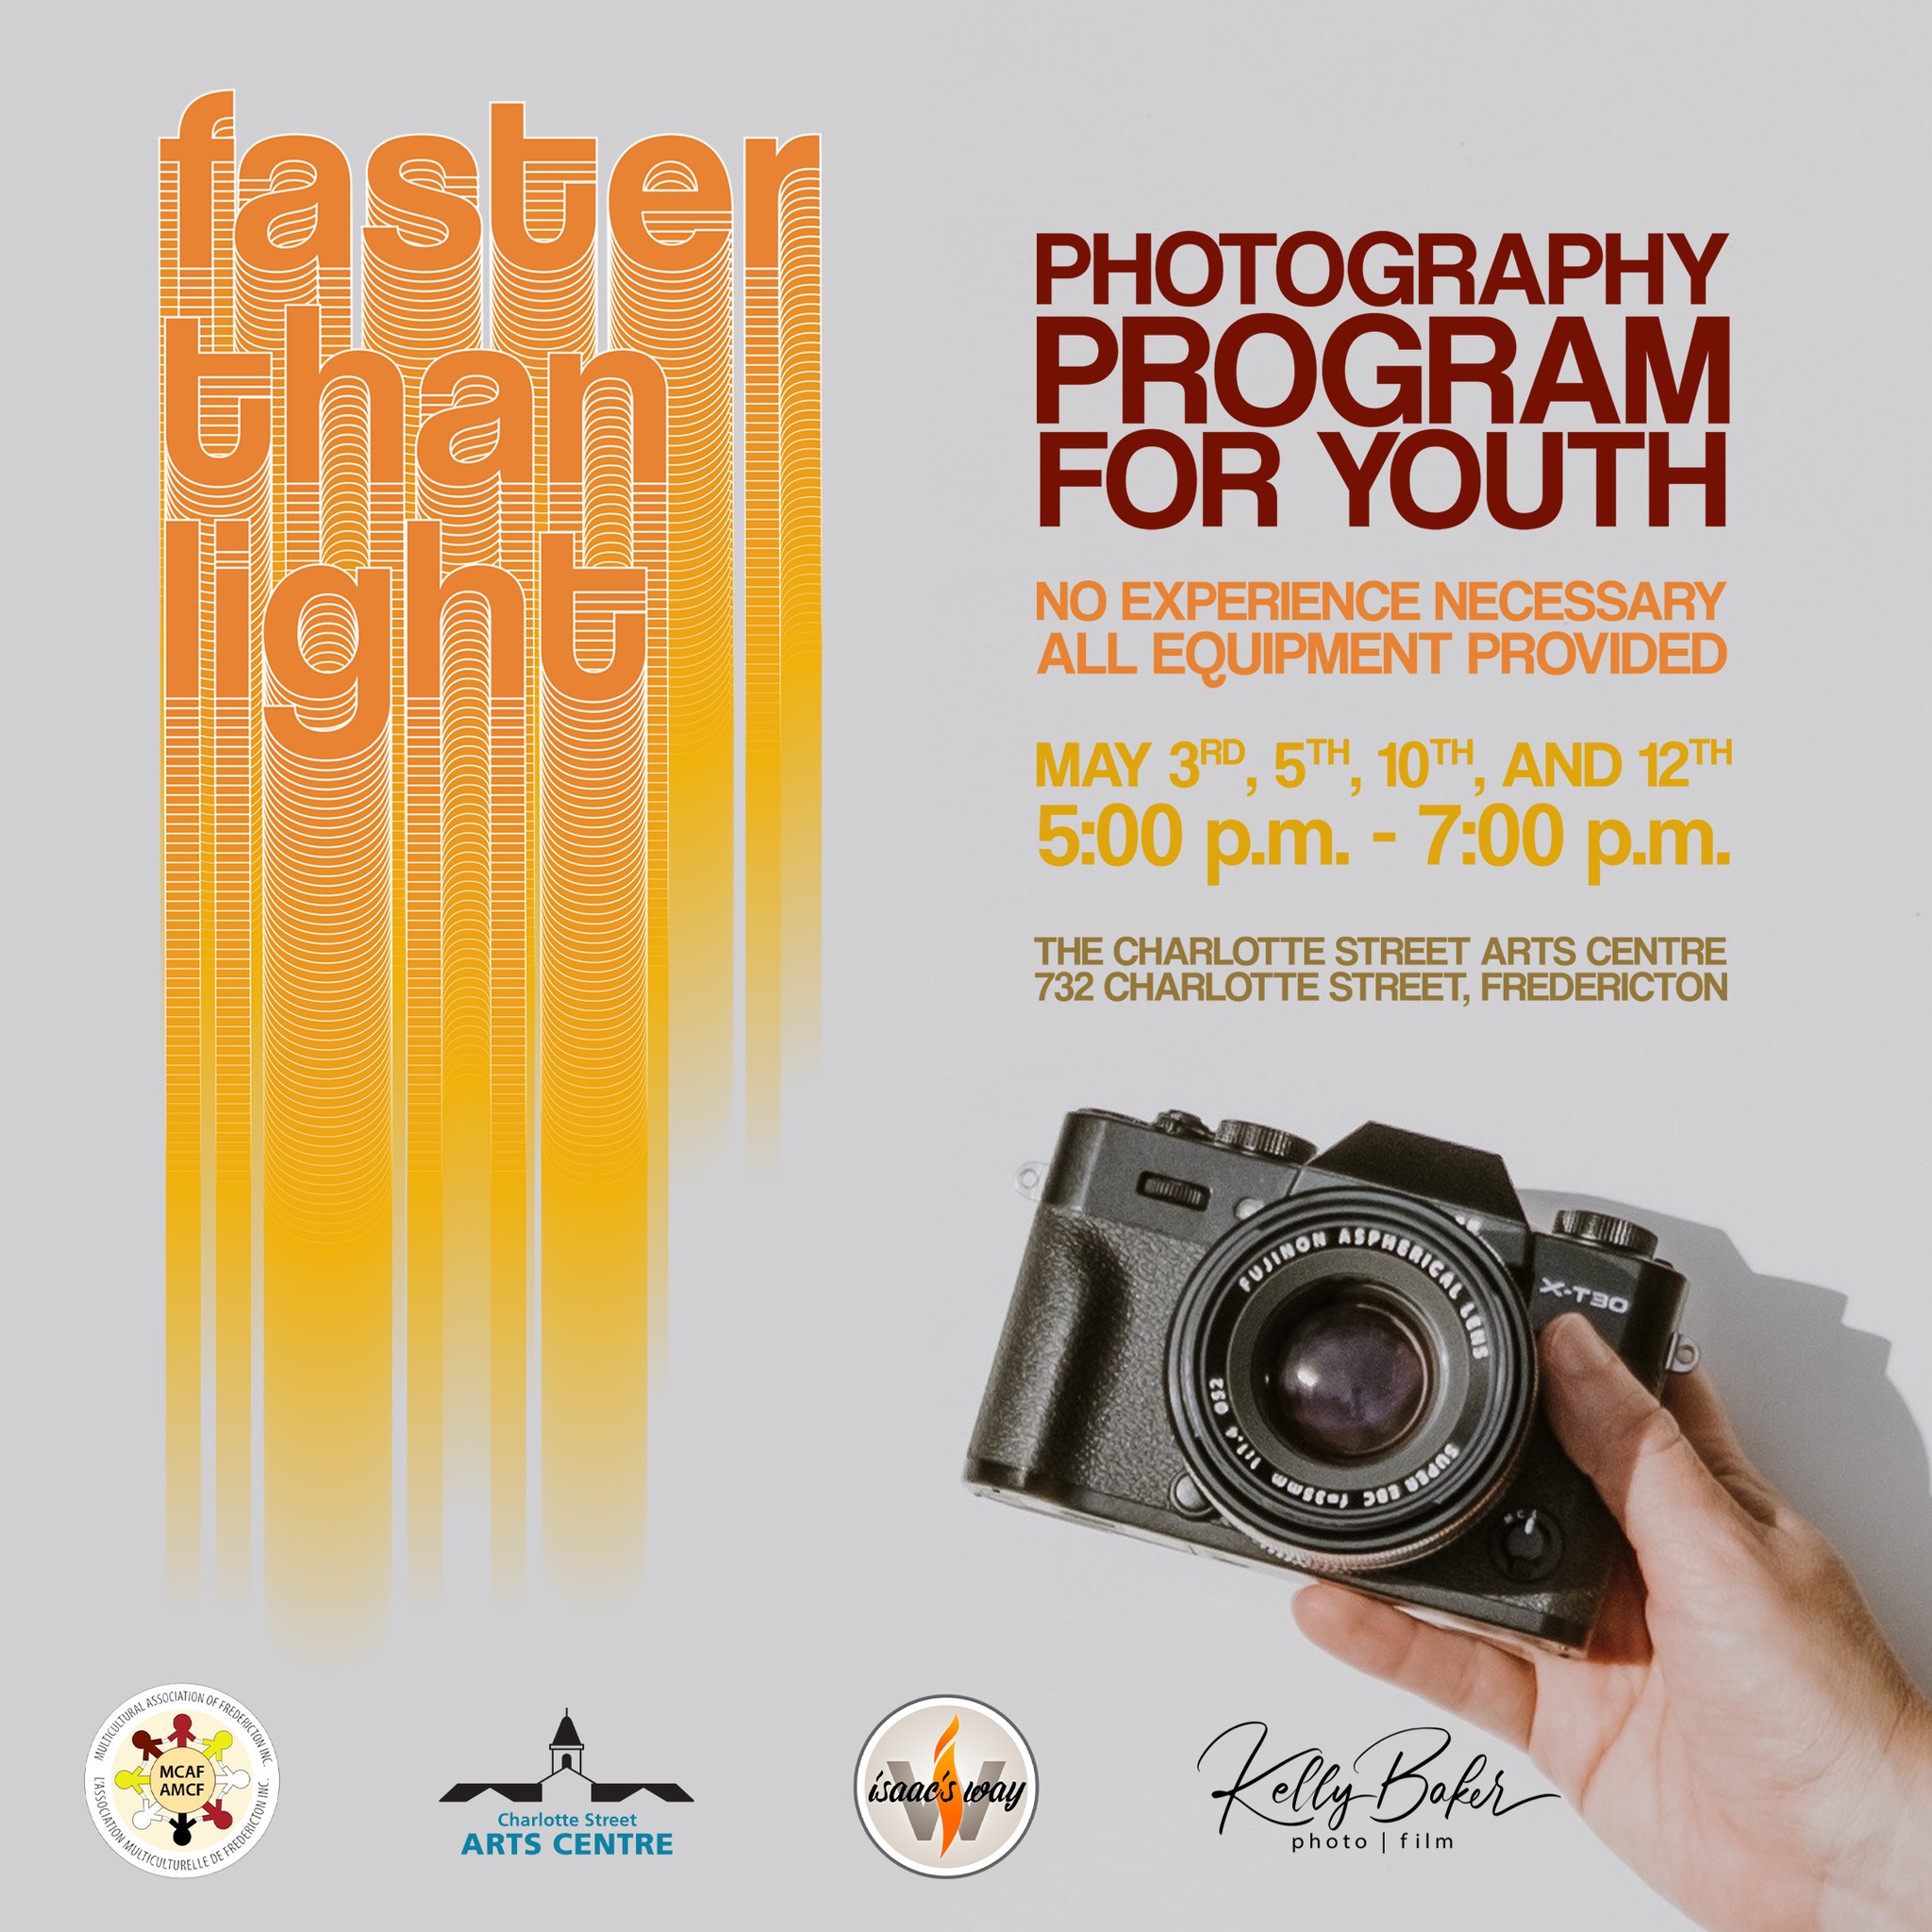 Faster than light photography program for youth. No experience necessary. All equipment provided. May 3rd, 5th, 10th, and 12th. The Charlotte Street Arts Centre, 732 Charlotte Street, Fredericton.